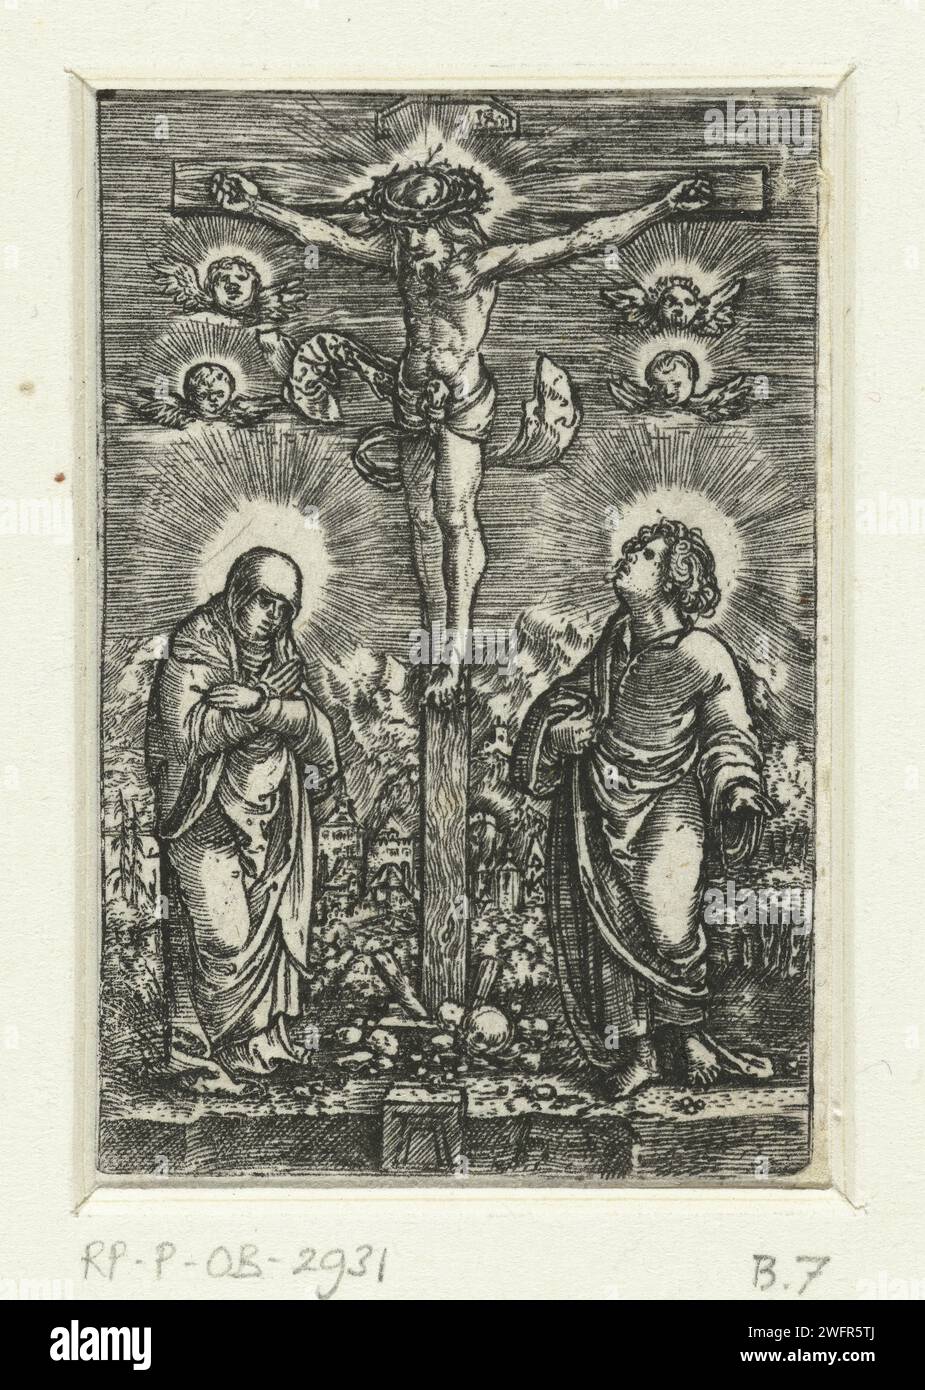 Christ on the cross between Maria and Johannes, Albrecht Altdorfer, c. 1506 - 1538 print Christ on the cross, with Mary on the right of Him and on the left John. Four Cherubin in the air. Germany paper engraving crucified Christ with Mary and John on either side of the cross; Holy Rood Stock Photo